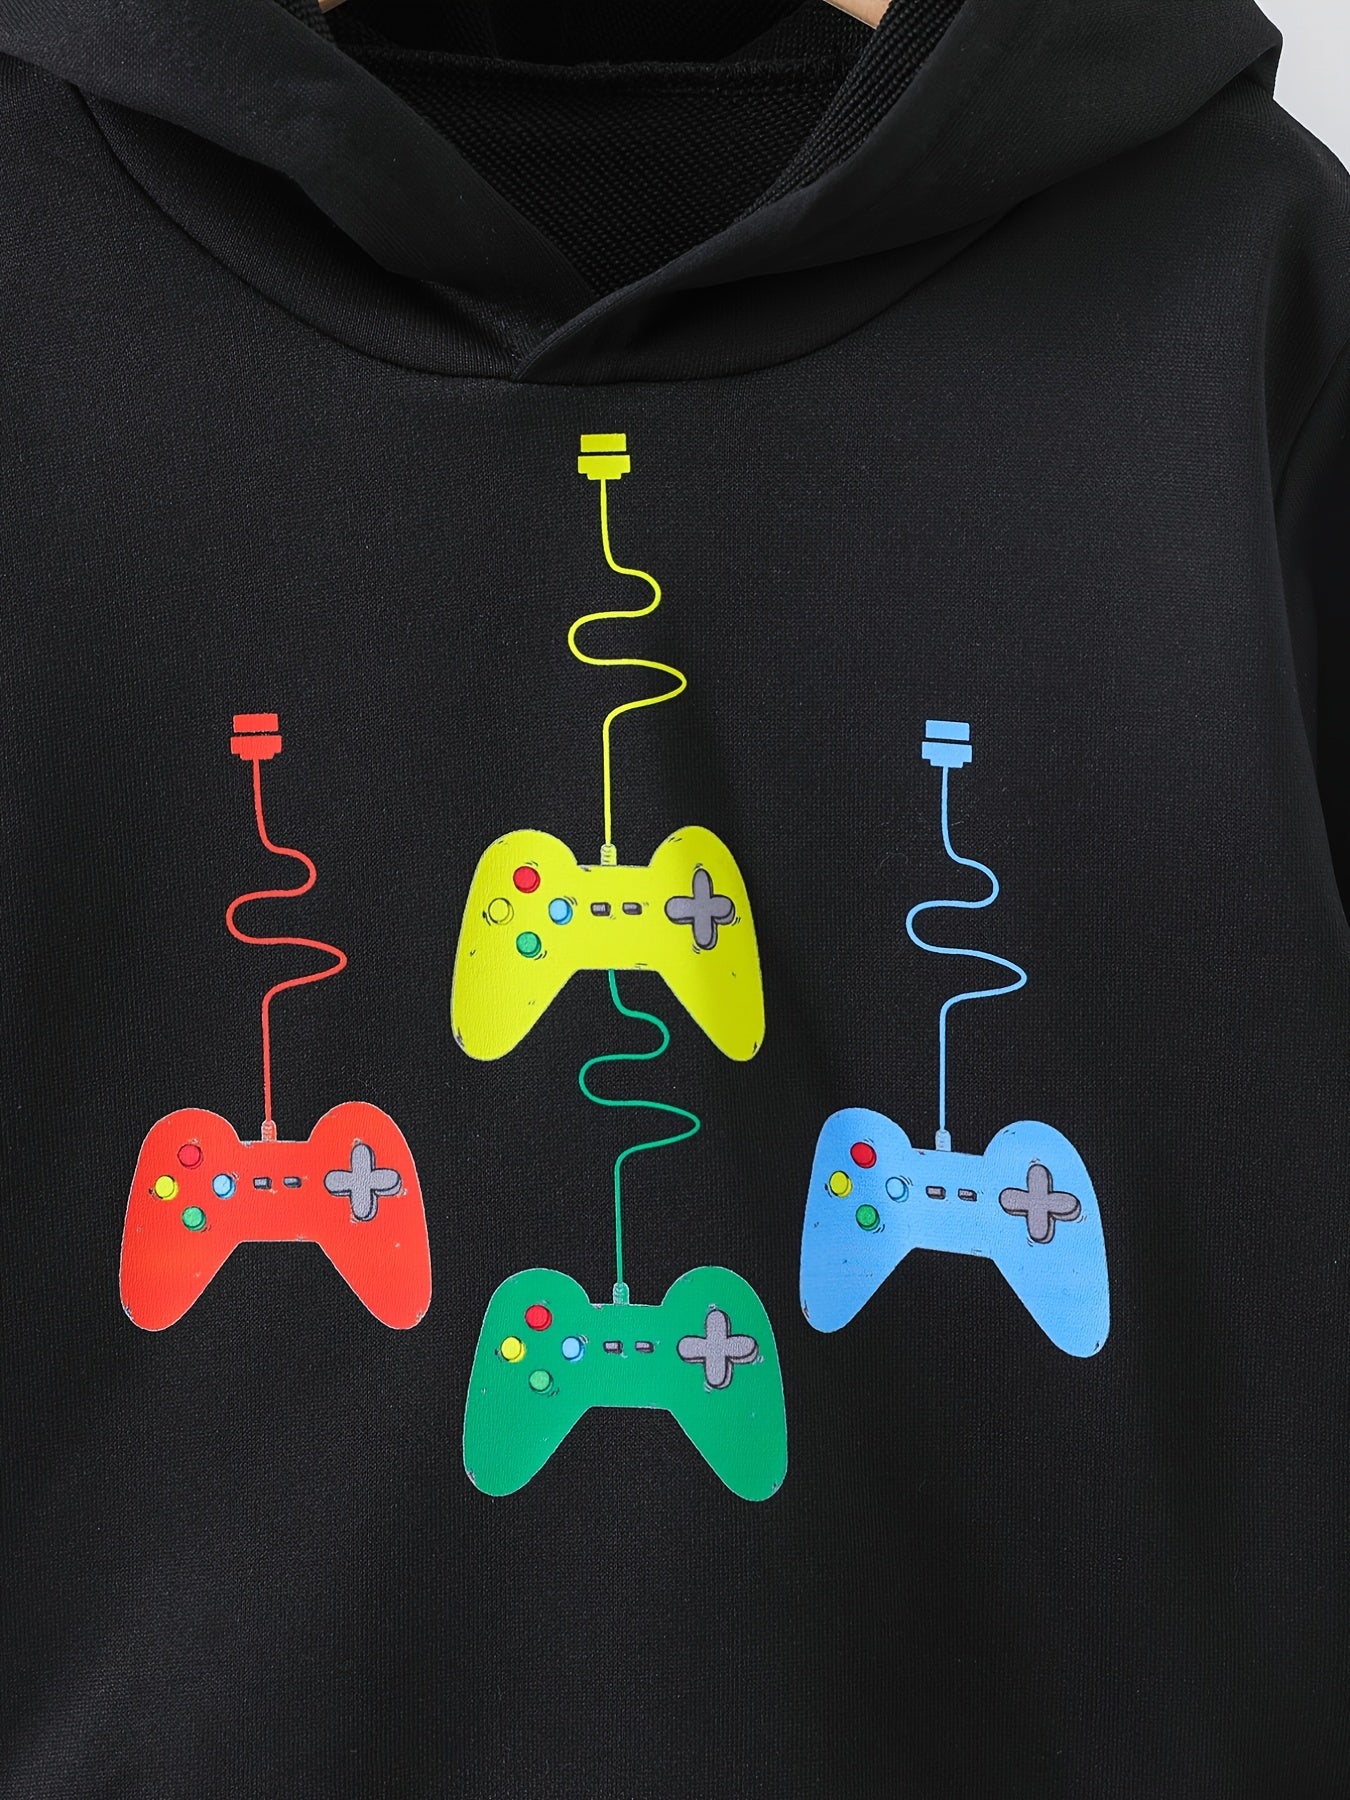 Colorful Gamepad Pattern Kid's Hoodie, Casual Long Sleeve Top, Boy's Clothes For Spring Fall